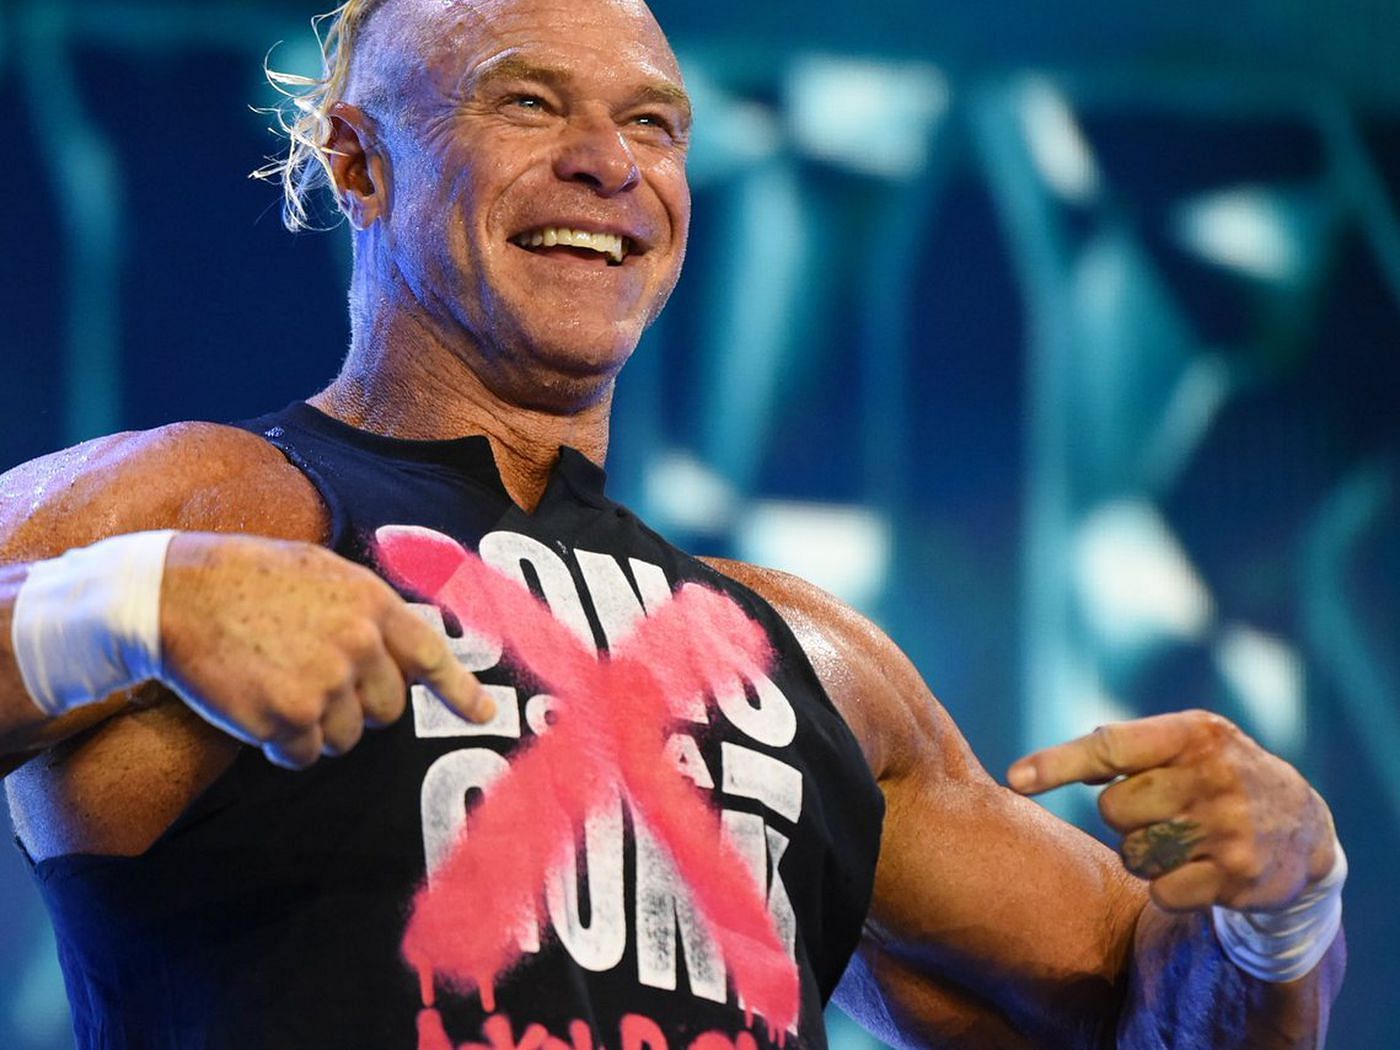 Billy Gunn has been a mentor for the AEW tag team the Acclaimed.